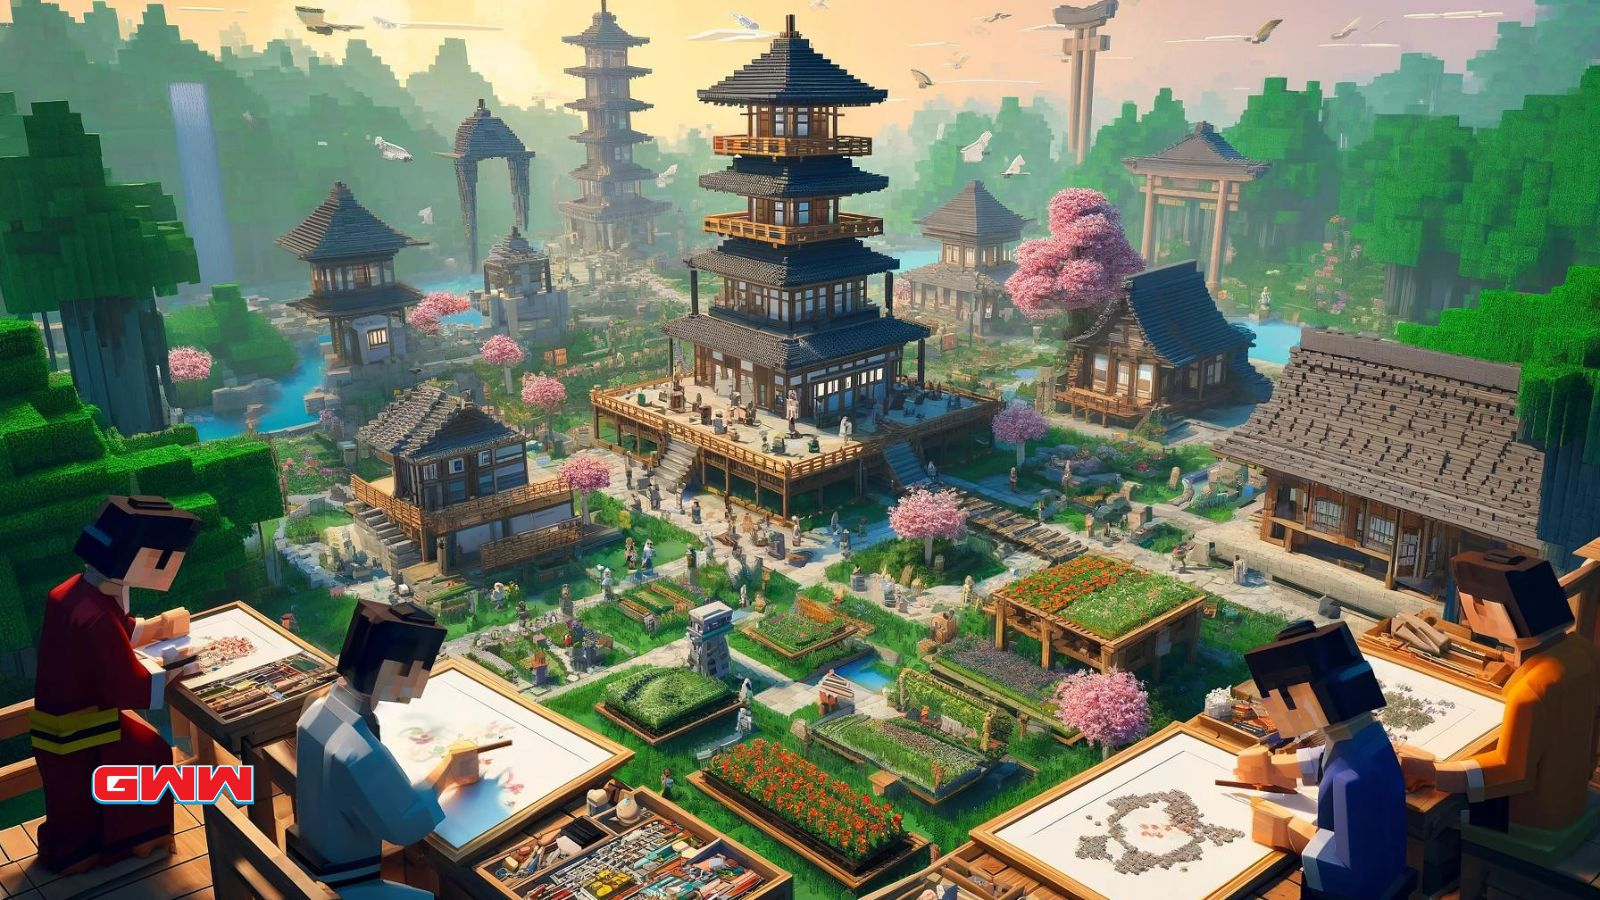 A detailed scene depicting the process of creating a Japanese-inspired world within a Minecraft-style virtual environment.